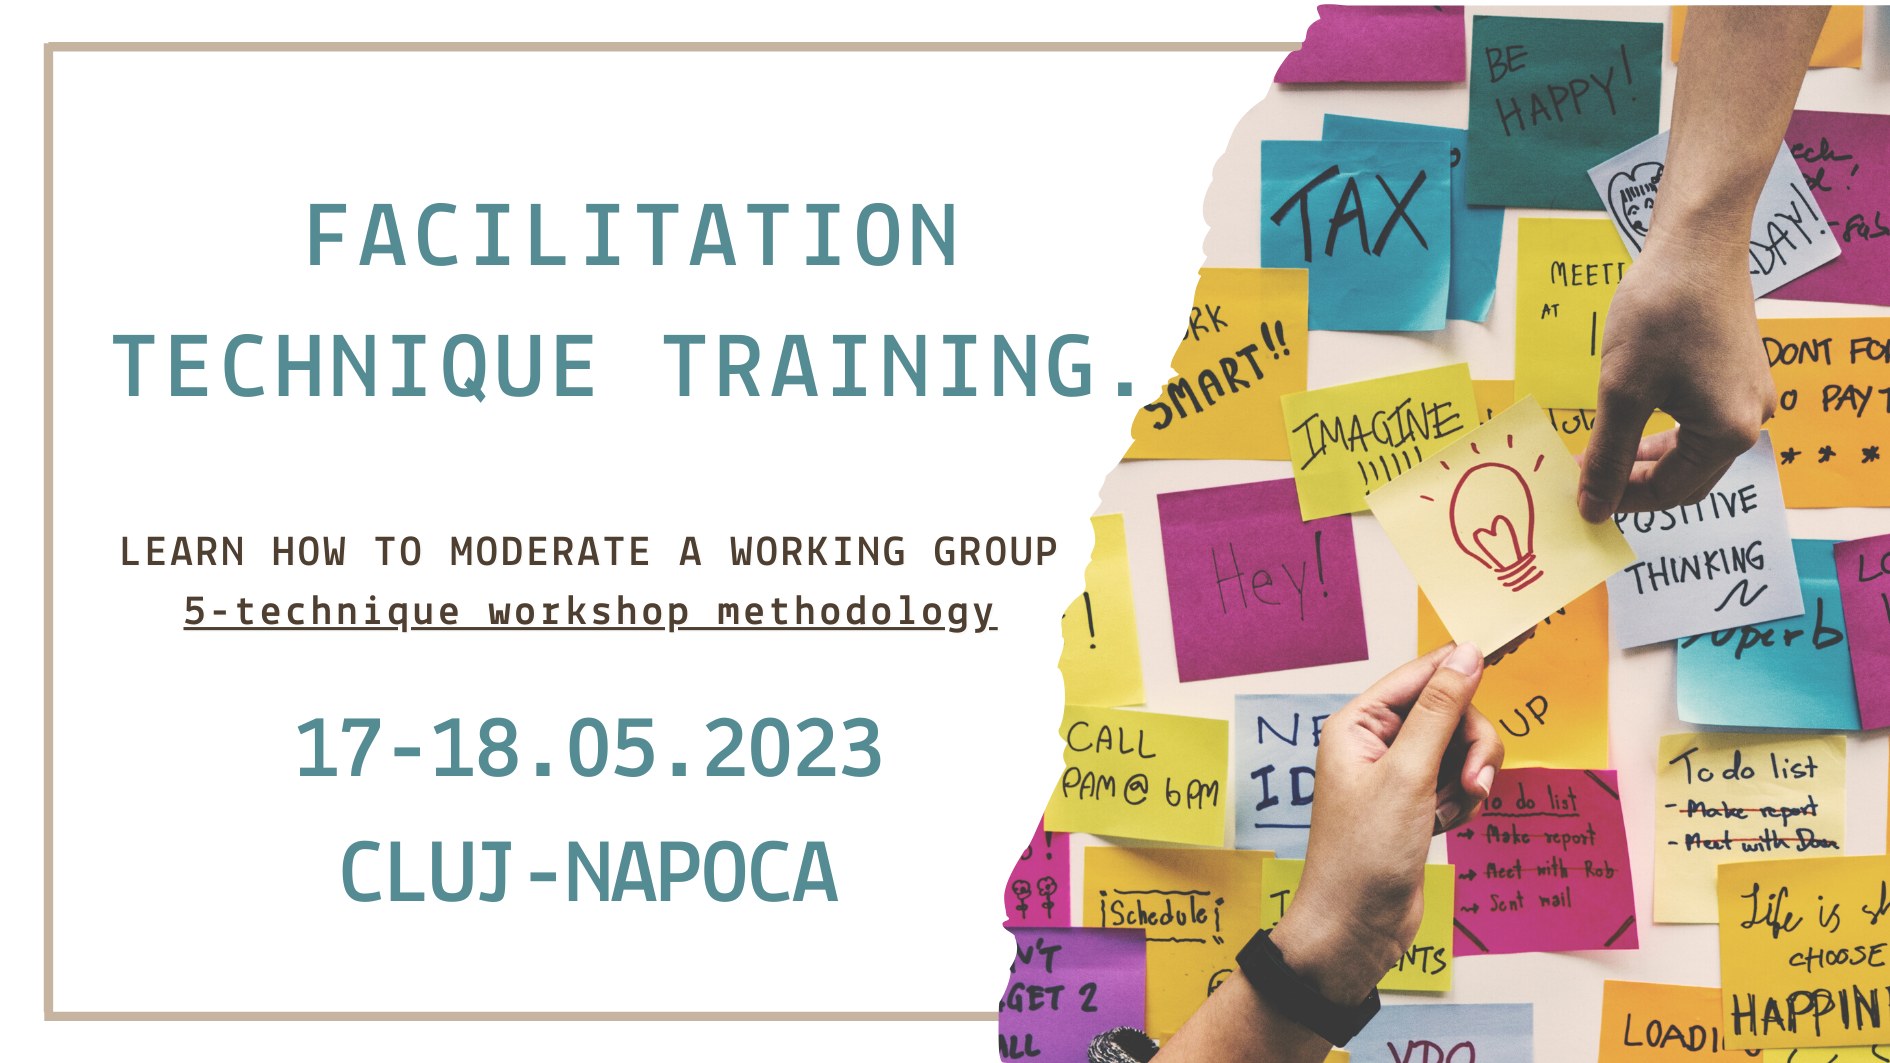 Facilitation Technique Training – How to moderate a working group